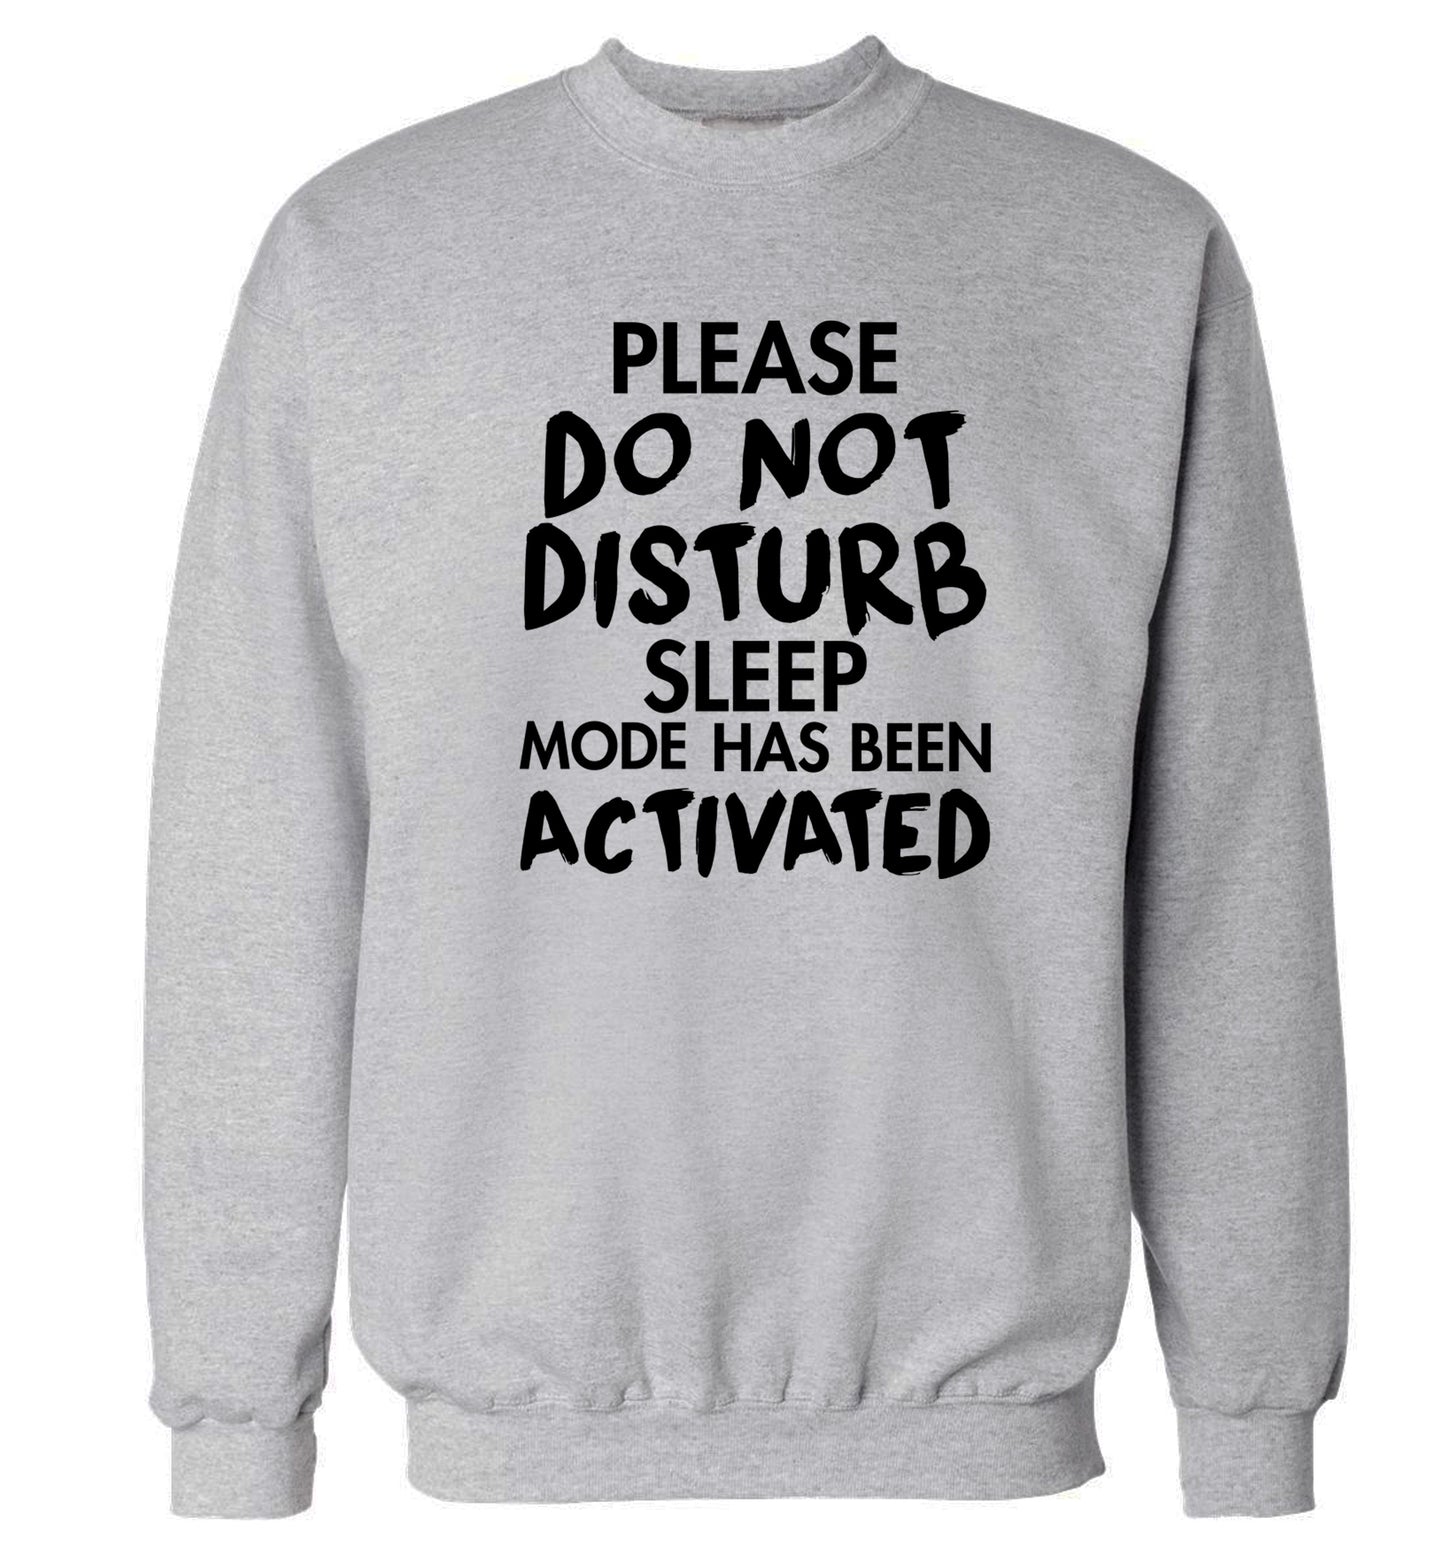 Please do not disturb sleeping mode has been activated Adult's unisex grey Sweater 2XL